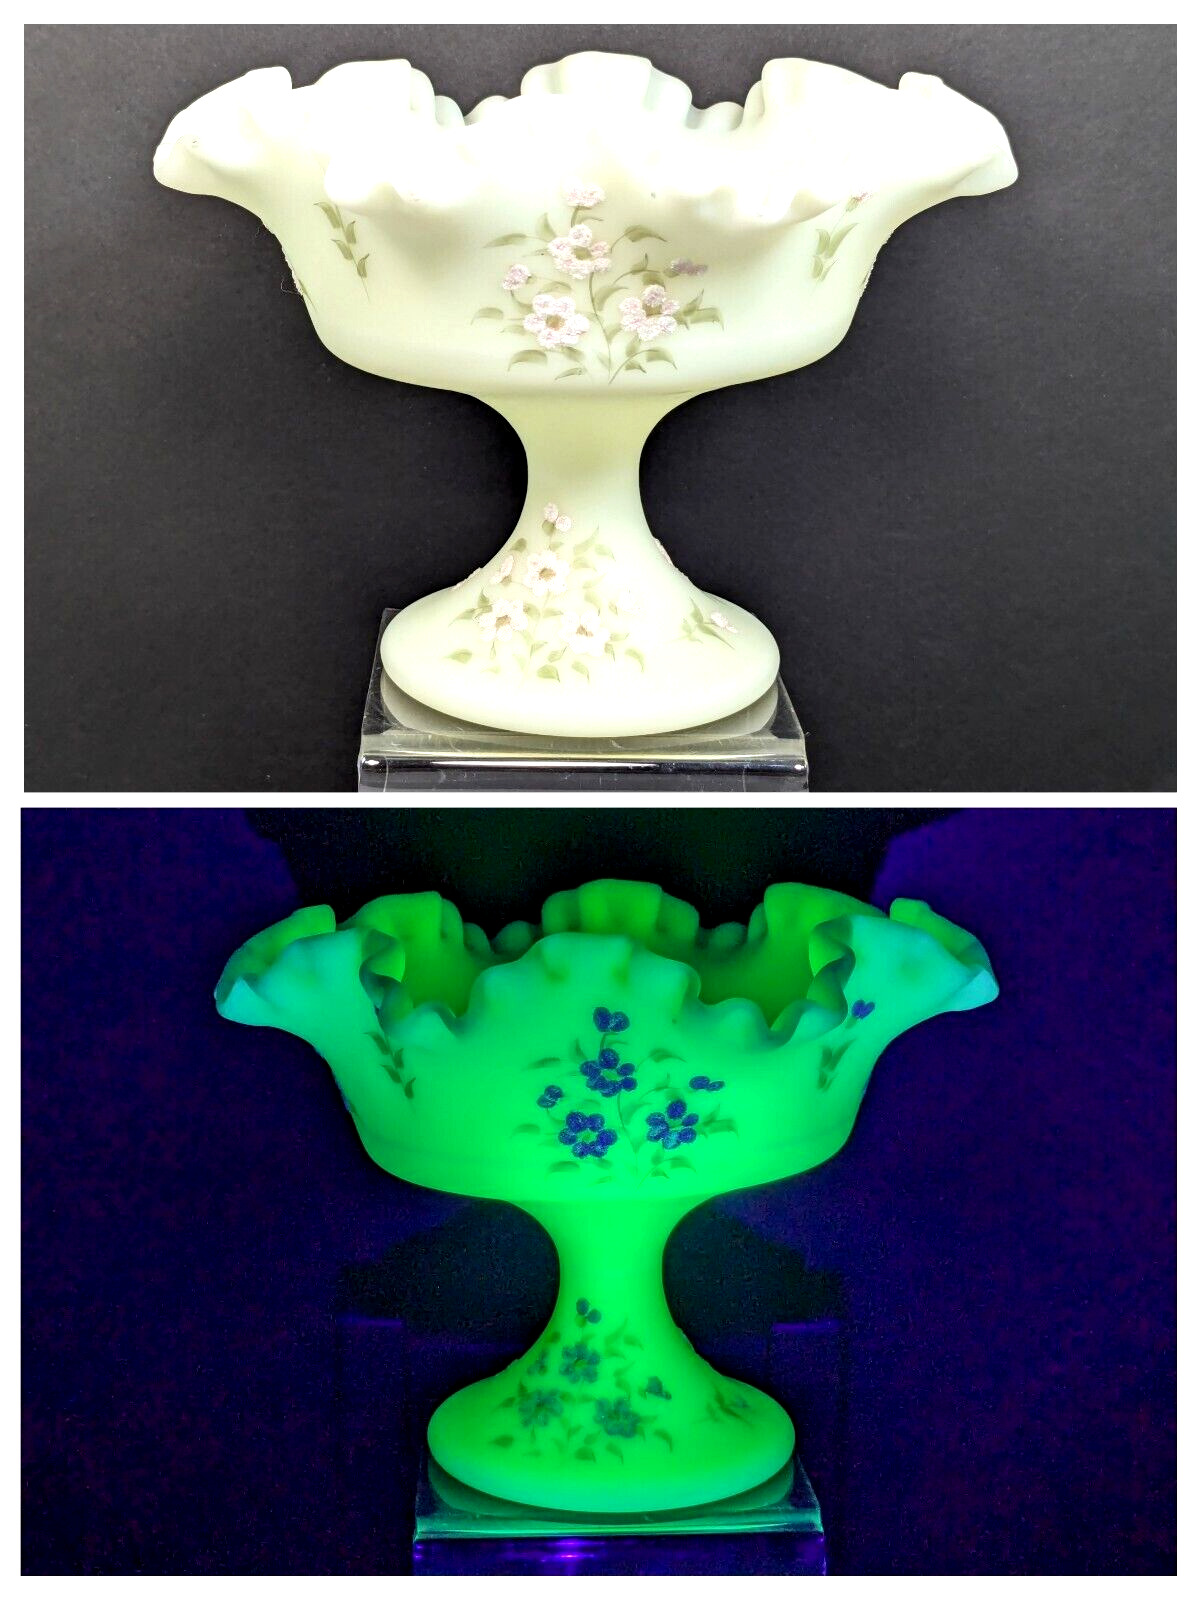 Fenton Custard Satin Compote Uranium Glass Glows Signed MB Metzger Hand Painted